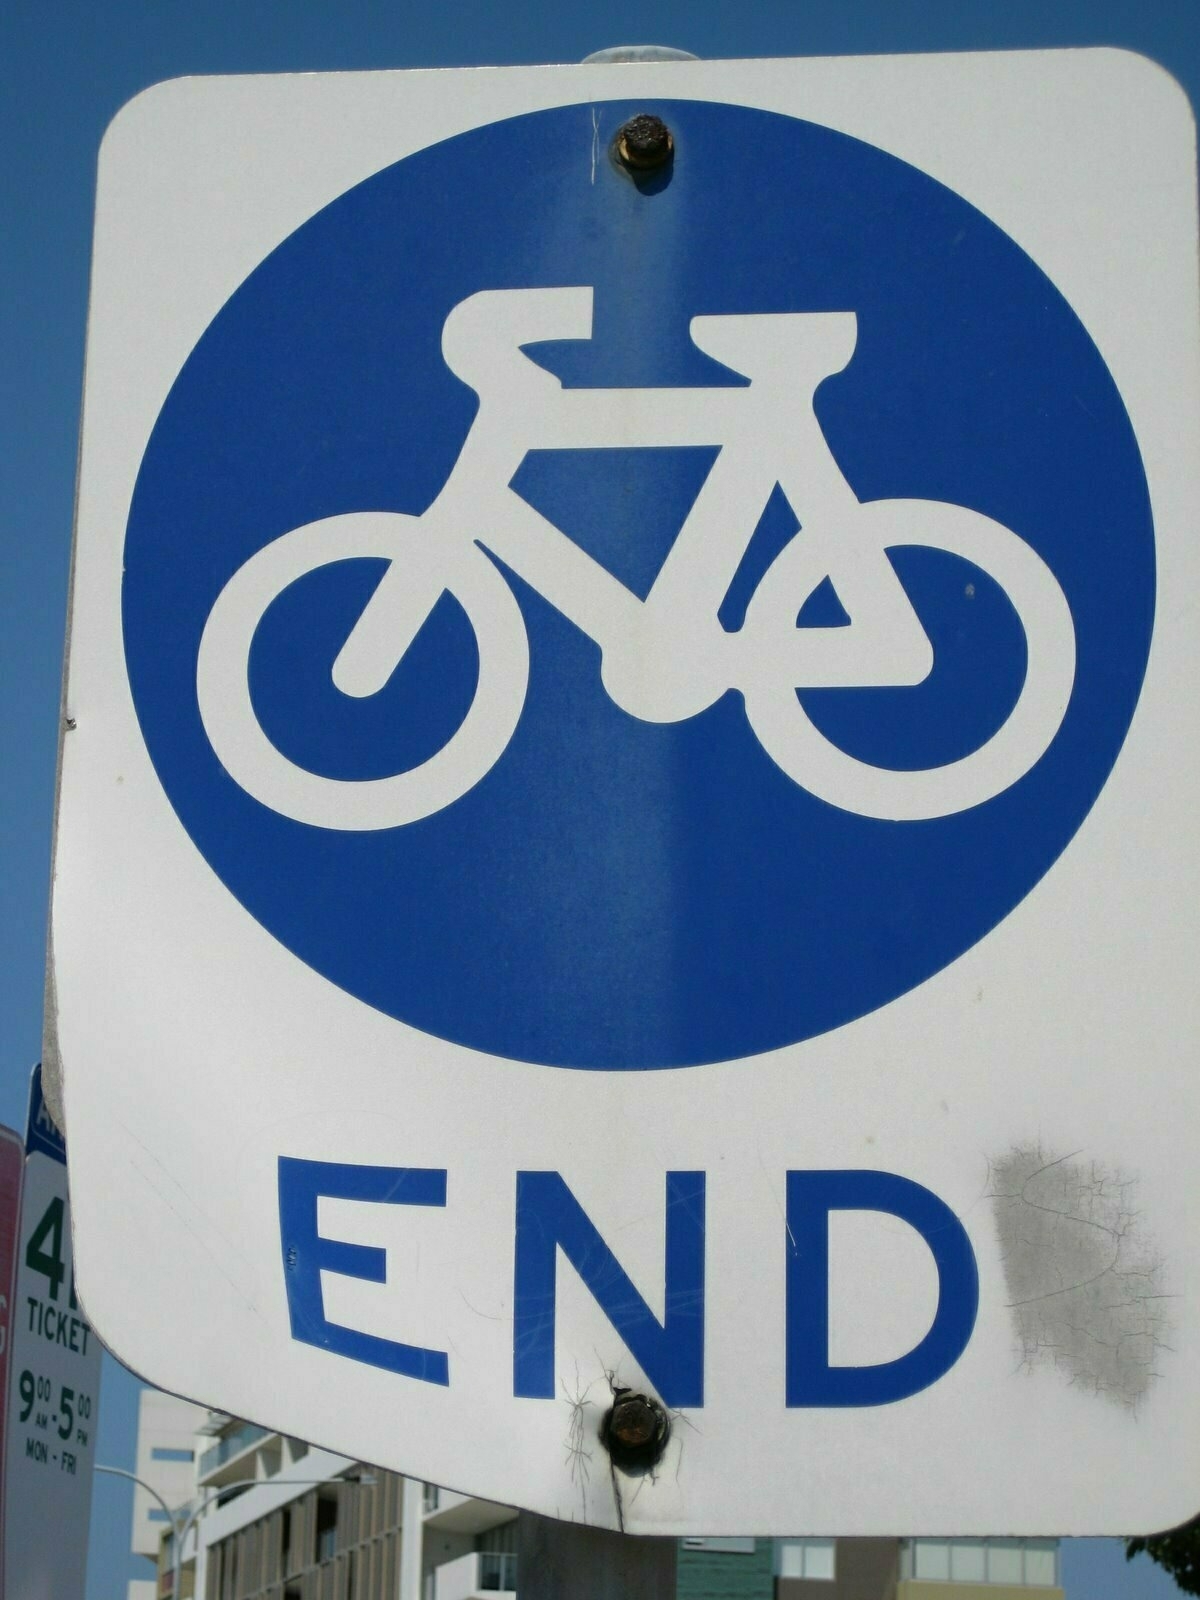 A blue and white road sign marks the end of a bicycle path.